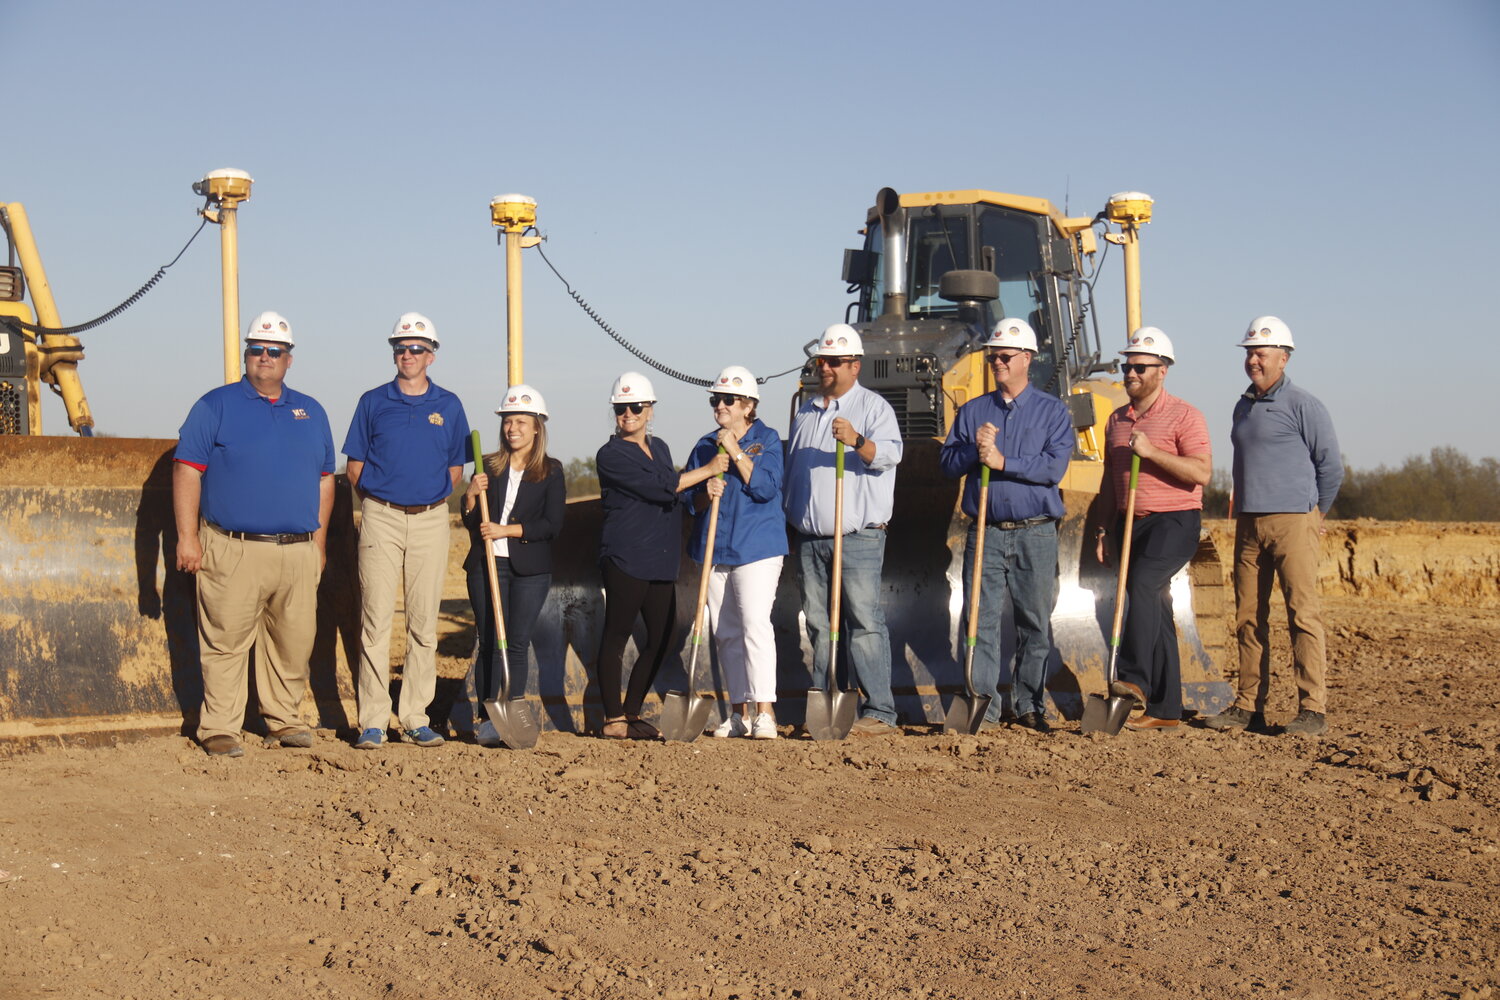 Representatives of the Wright City School District pose with shovels during the groundbreaking ceremony last week. Those shown are, from left: Assistant Superintendent Jeremy Way, Assistant Superintendent Doug Smith, board members Beth Dean, Heidi Halleman, Mary Groeper, David Mikus, Austin Jones, Kyle Lewis and Superintendent Chris Berger.